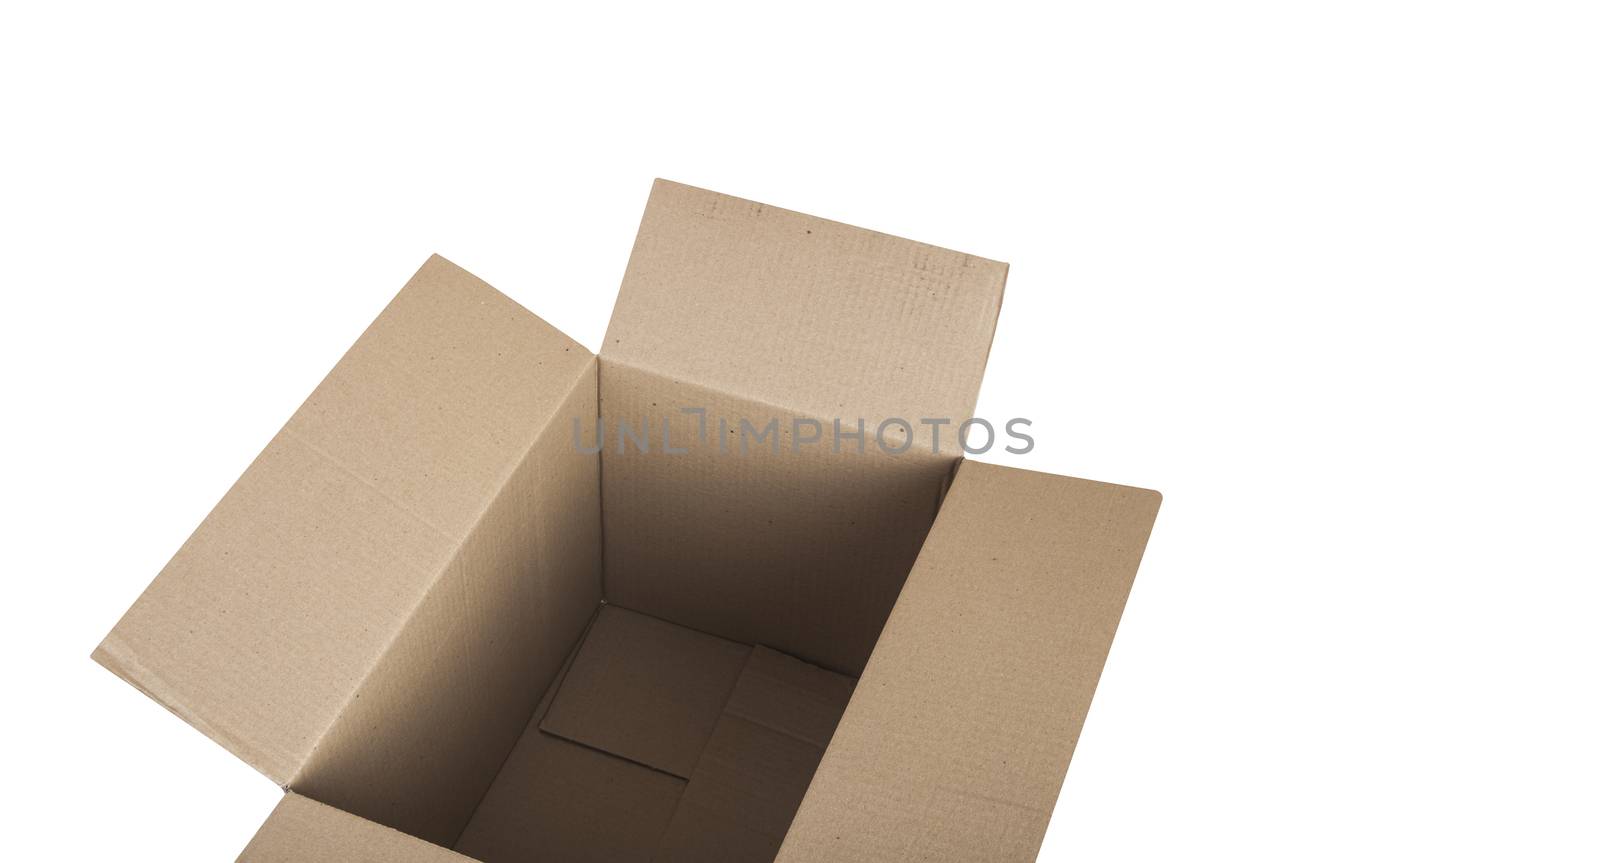 Cardboard craft box open. To transport items. Isolated on white background